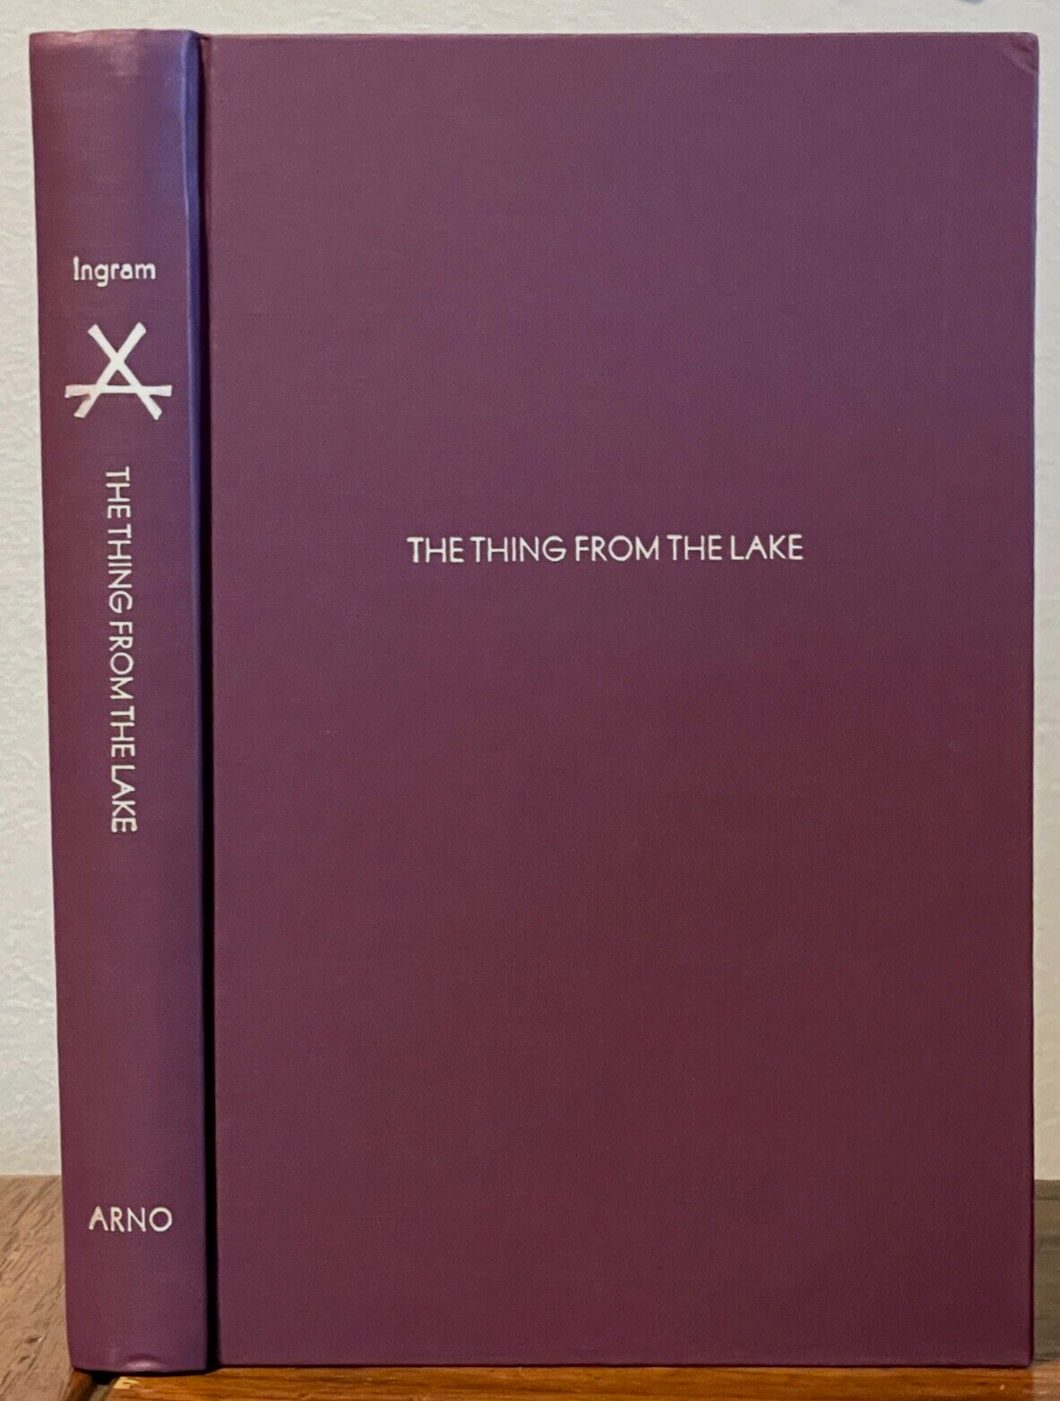 THE THING FROM THE LAKE - Arno Press / Ingram, 1st 1976 - GOTHIC HORROR GHOSTS